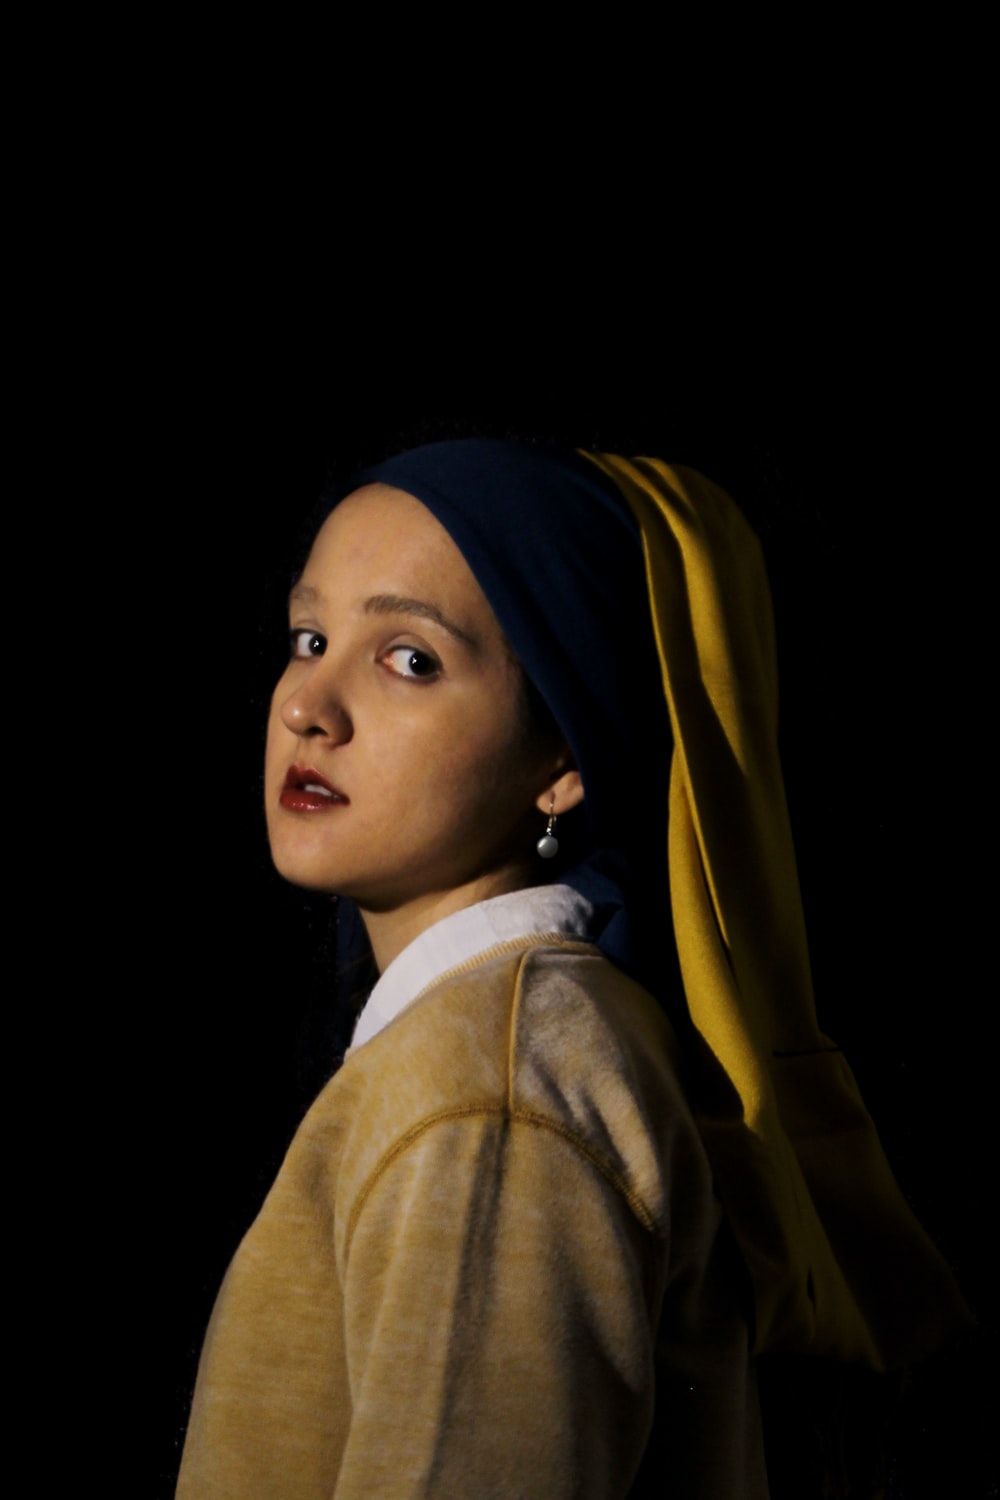 Girl With A Pearl Earring Picture. Download Free Image